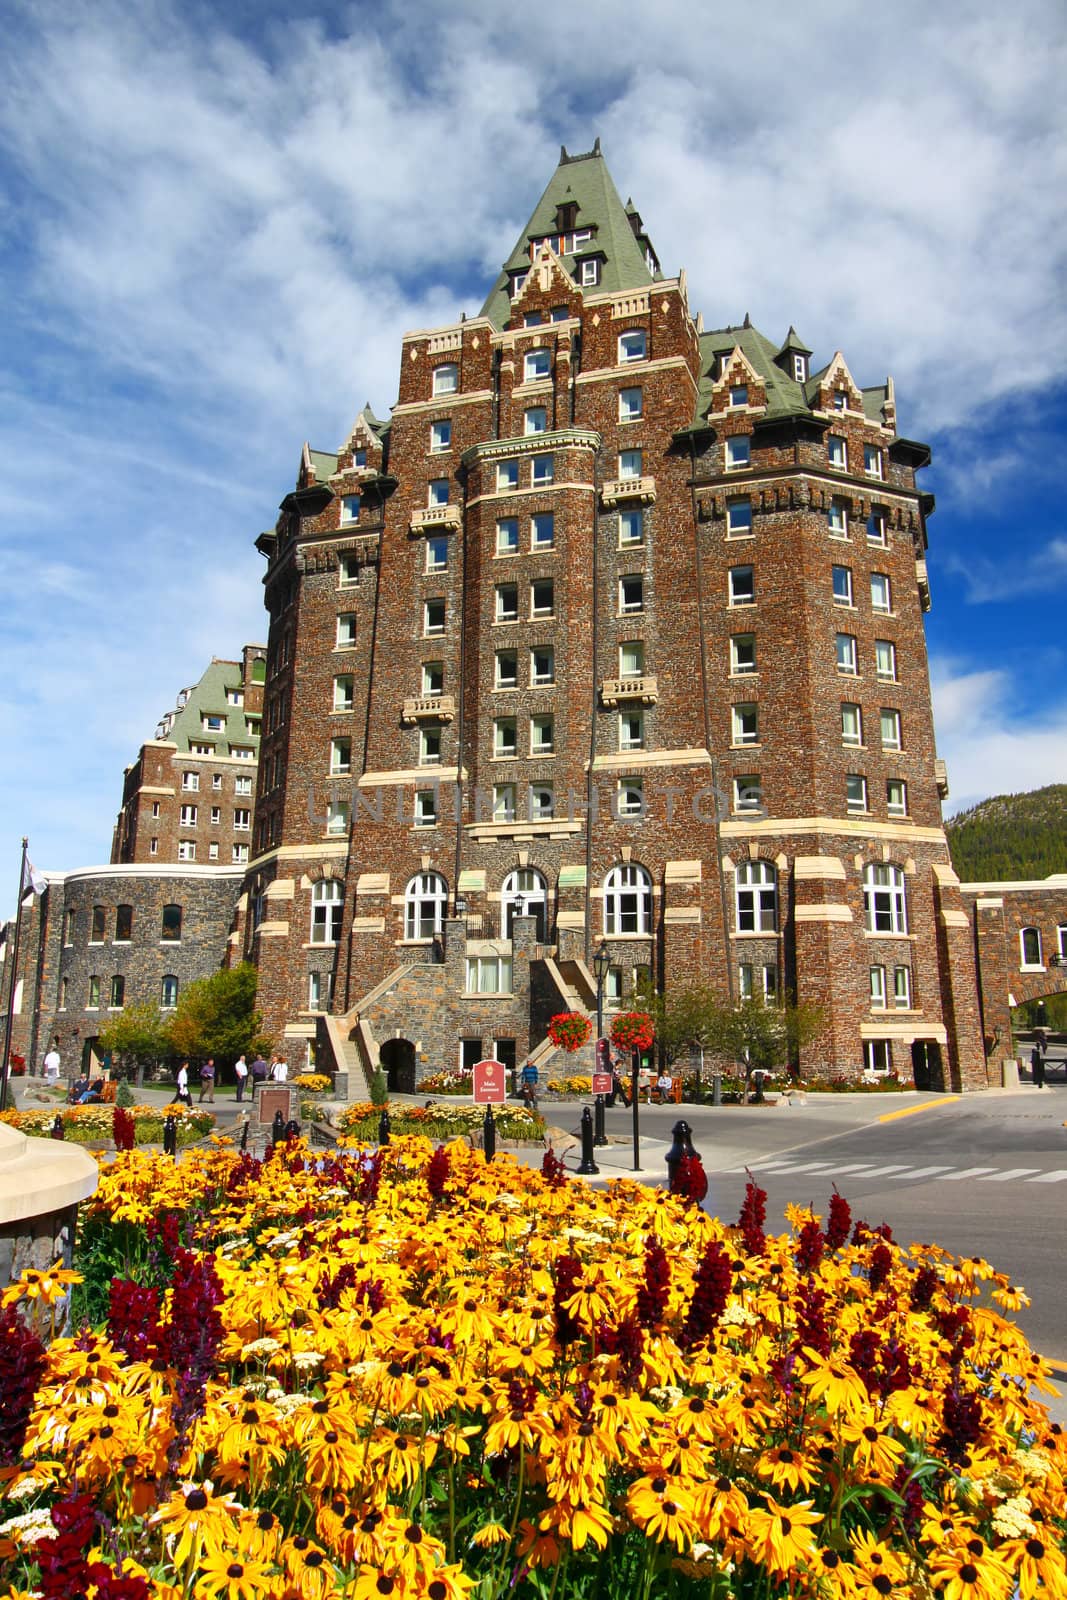 Banff, Canada - September 21, 2011: The Fairmont Banff Springs Hotel is in the Canadian Rockies and was opened in the year 1888.